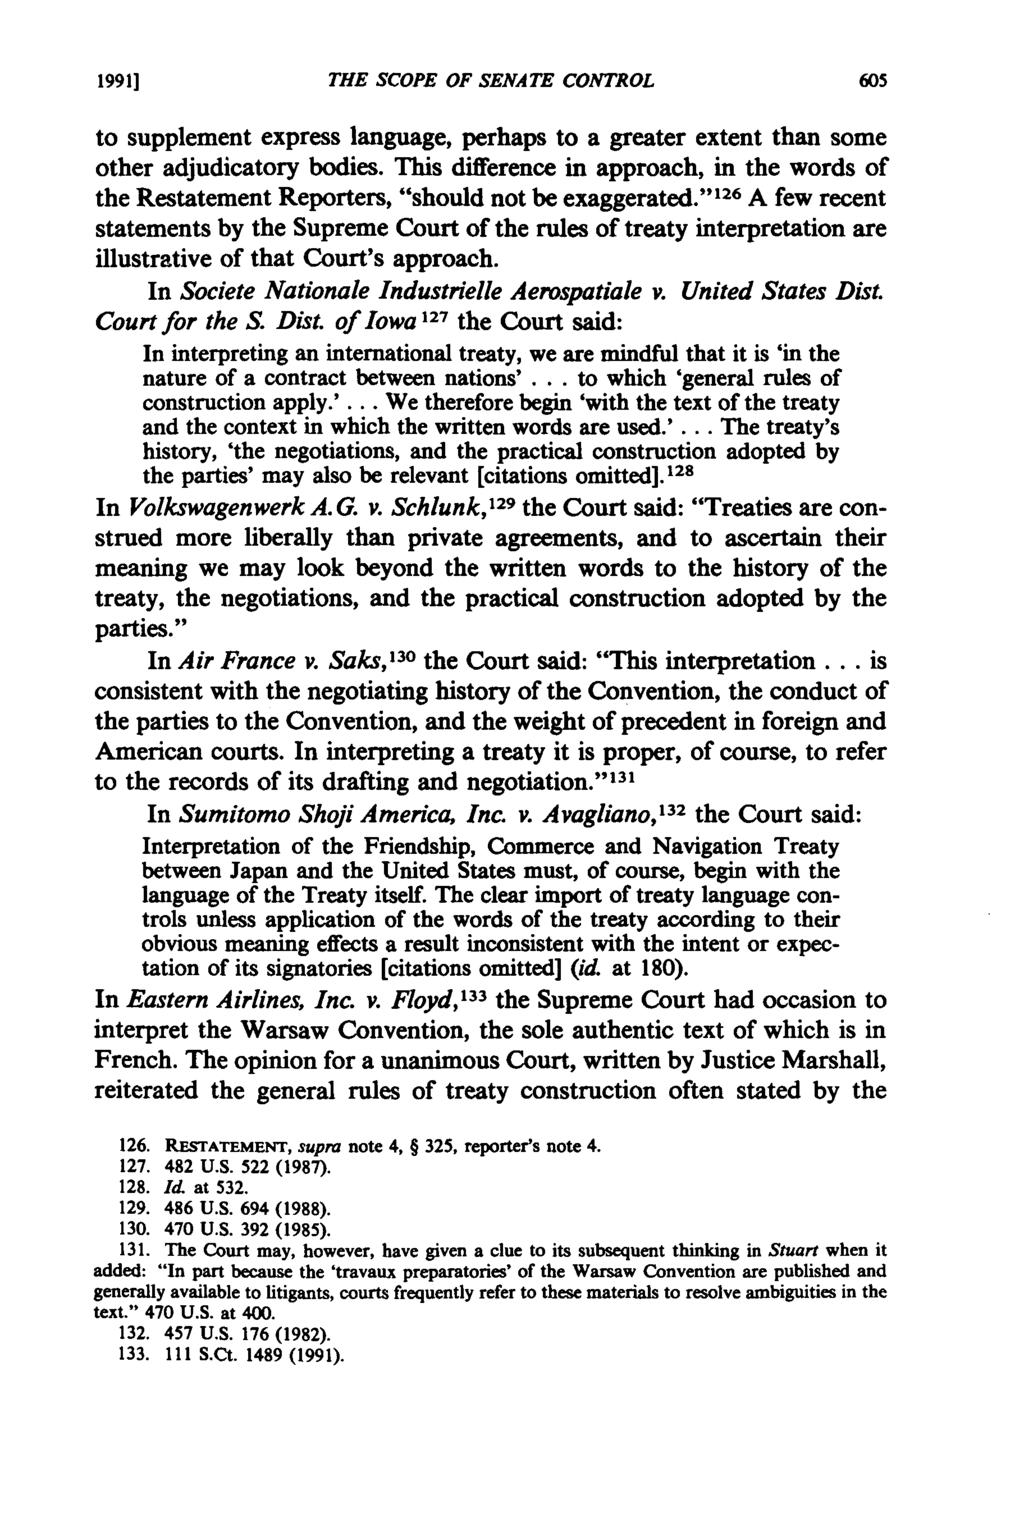 1991] THE SCOPE OF SENATE CONTROL to supplement express language, perhaps to a greater extent than some other adjudicatory bodies.